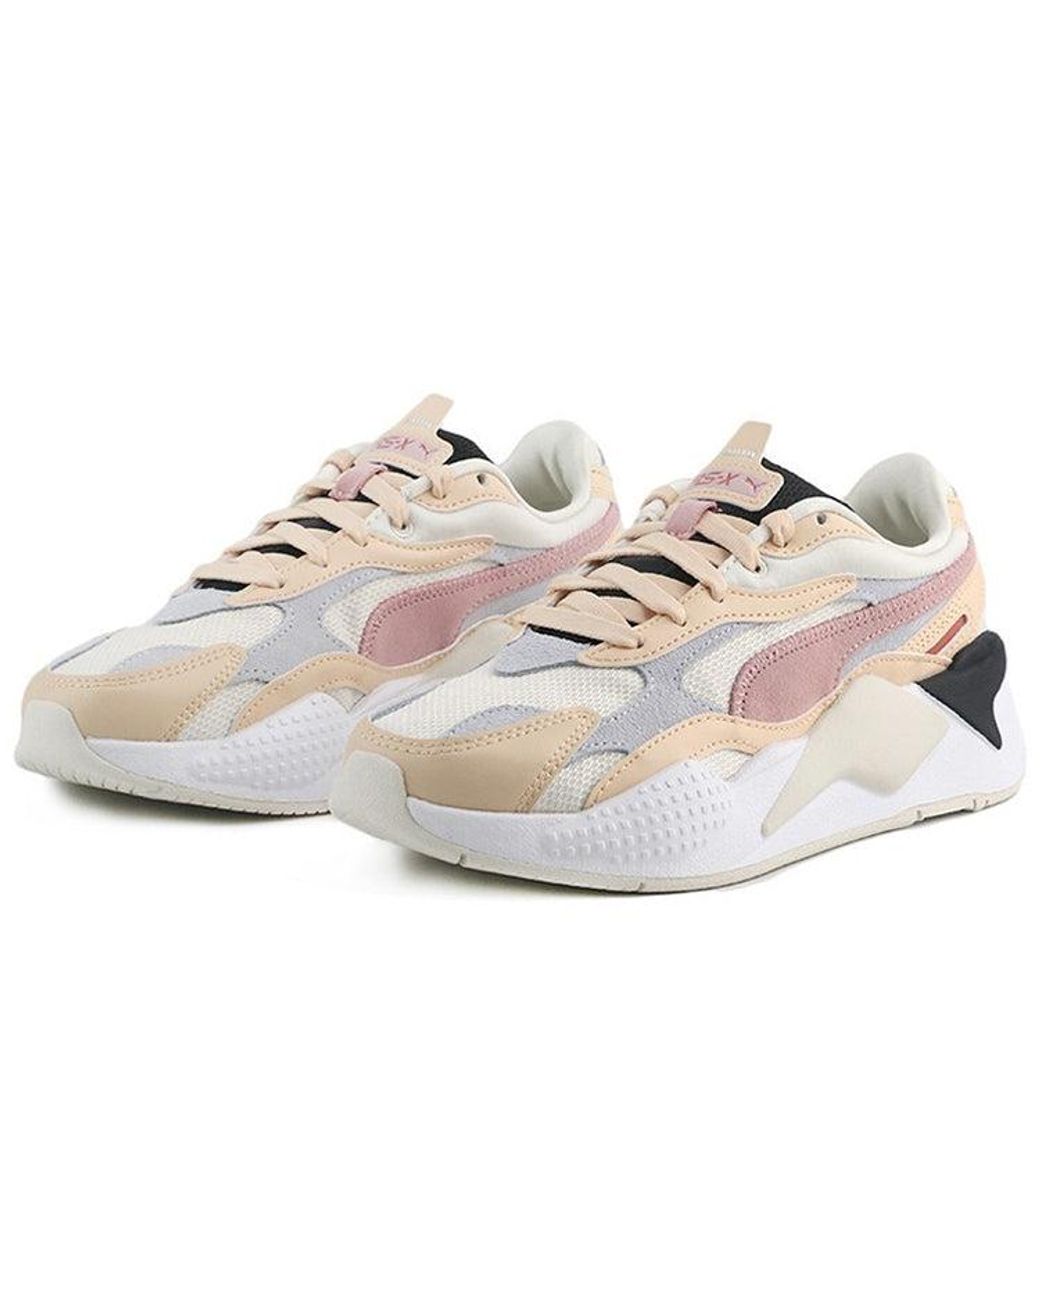 PUMA Rs-x3 Layers Multicolor in White | Lyst